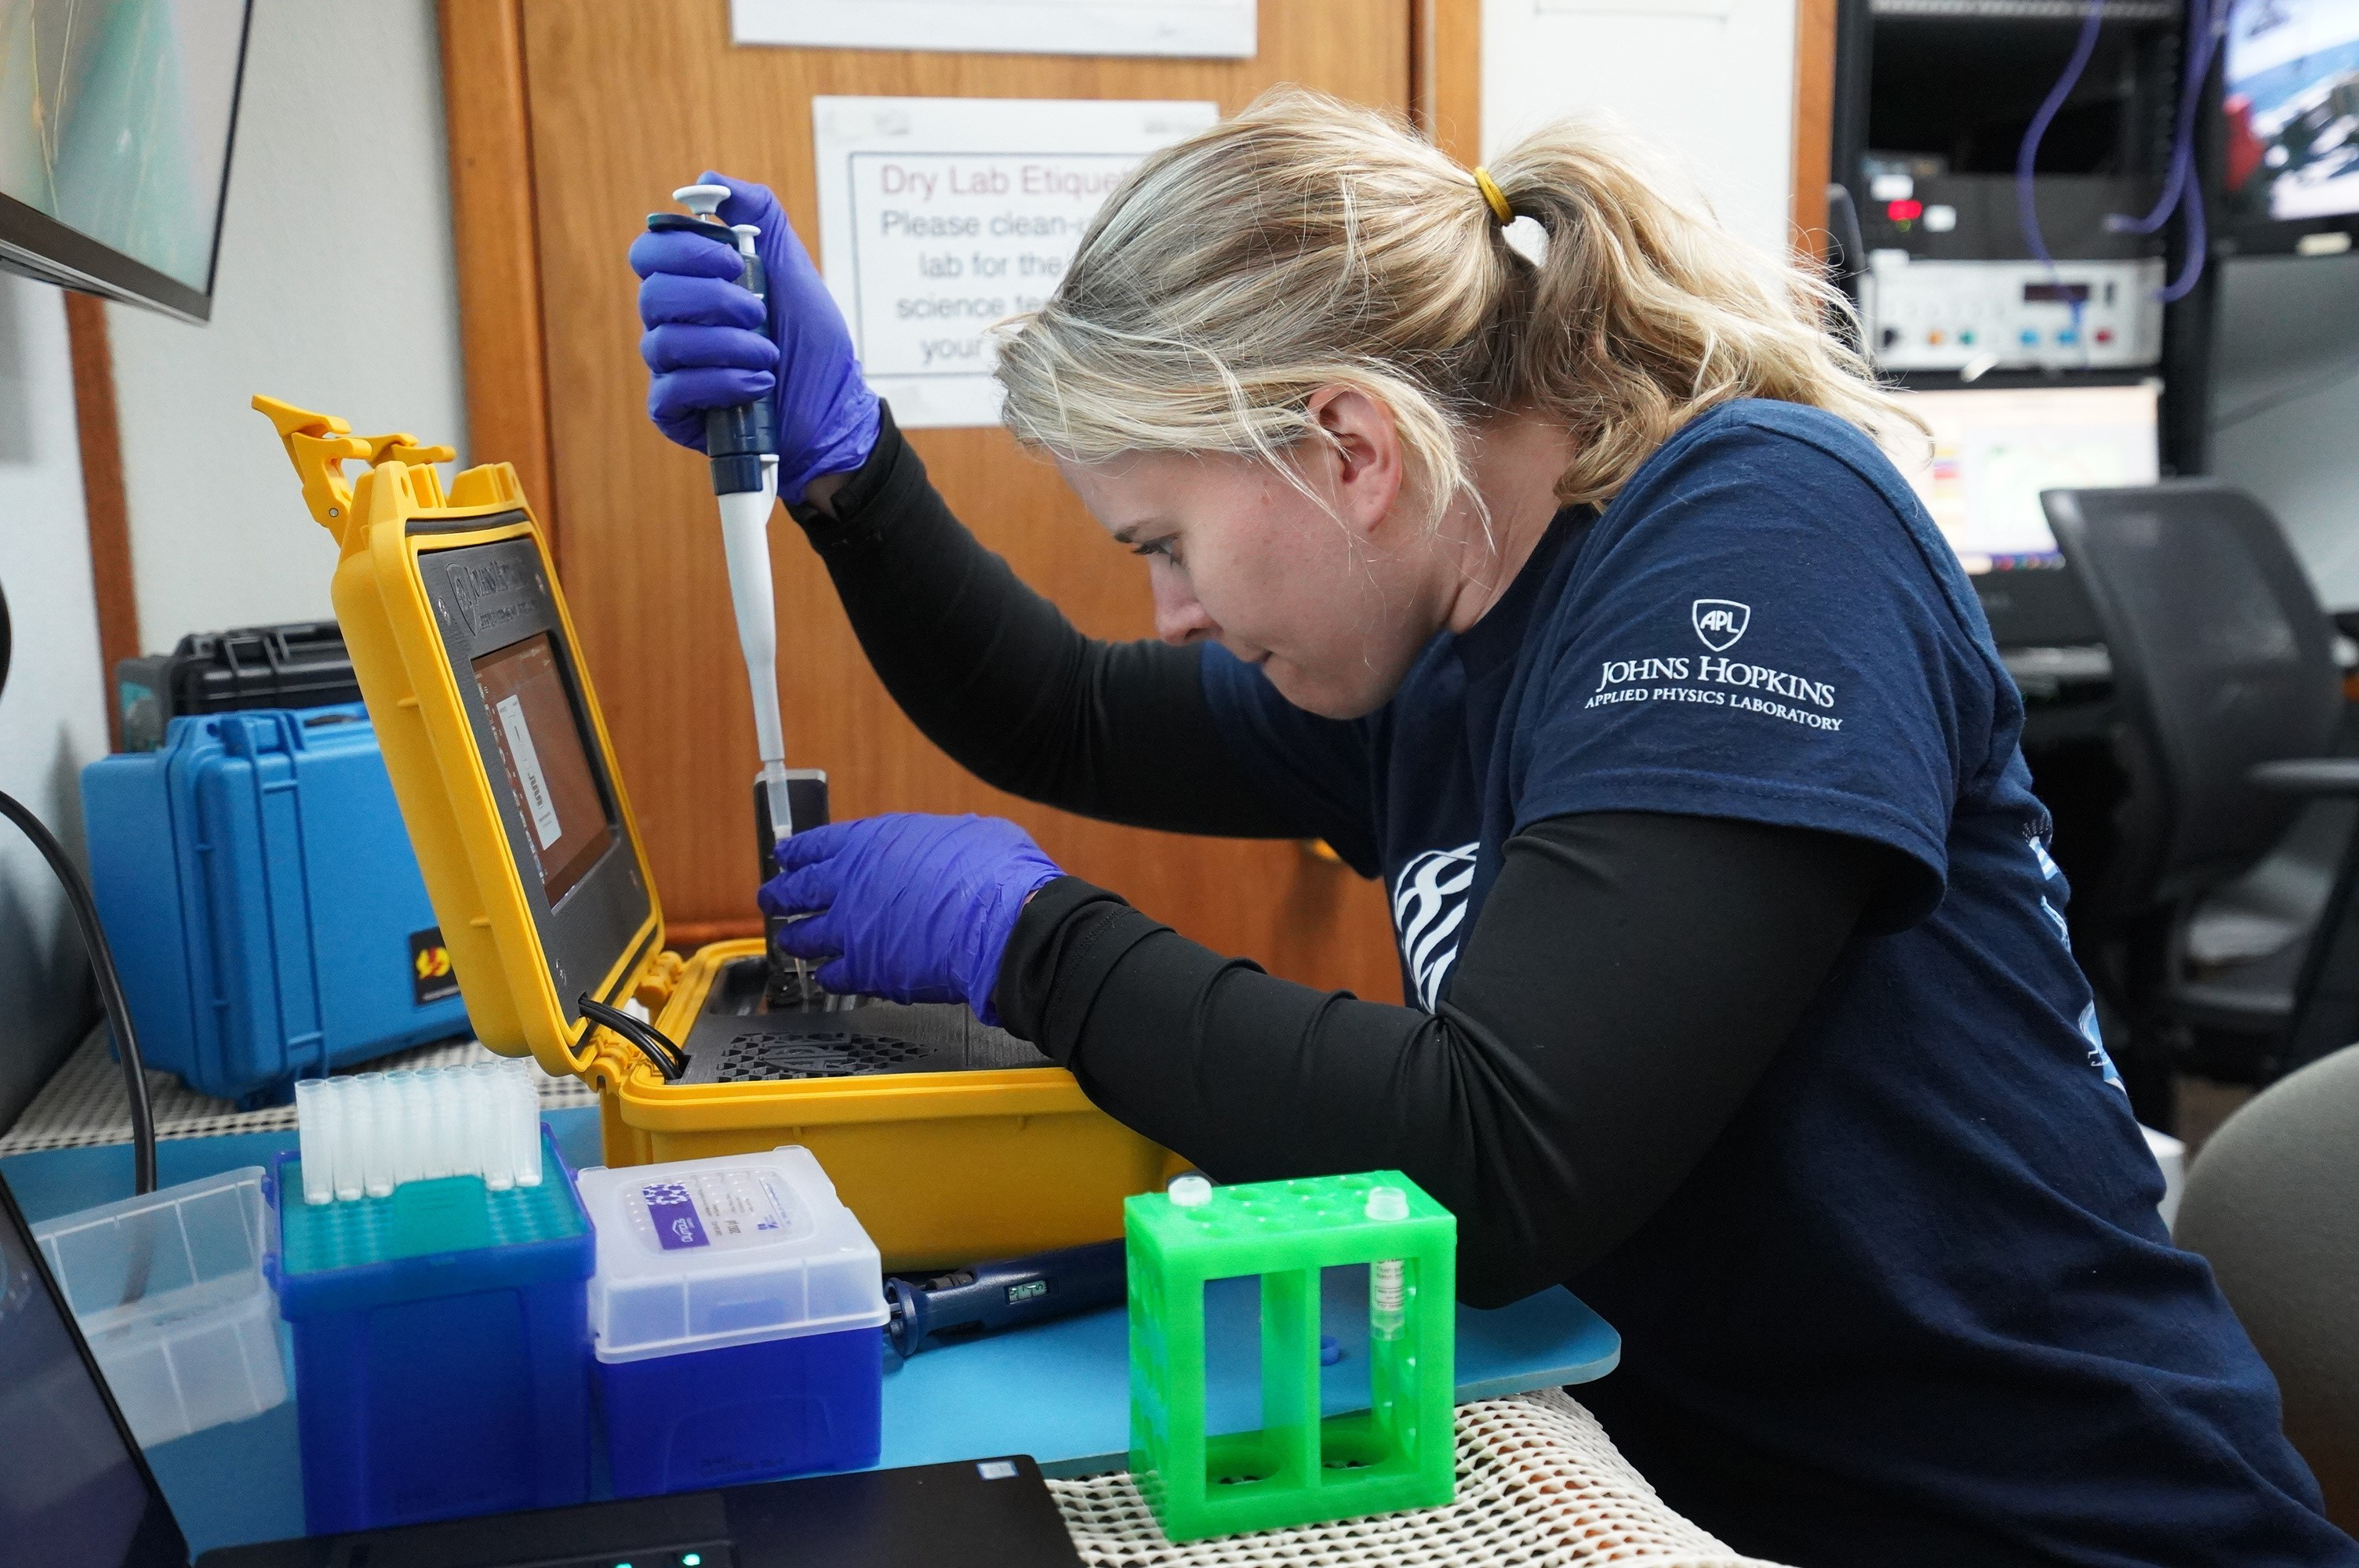 Hayley DeHart, a genomics research scientist at APL, loads water samples into a sequencer